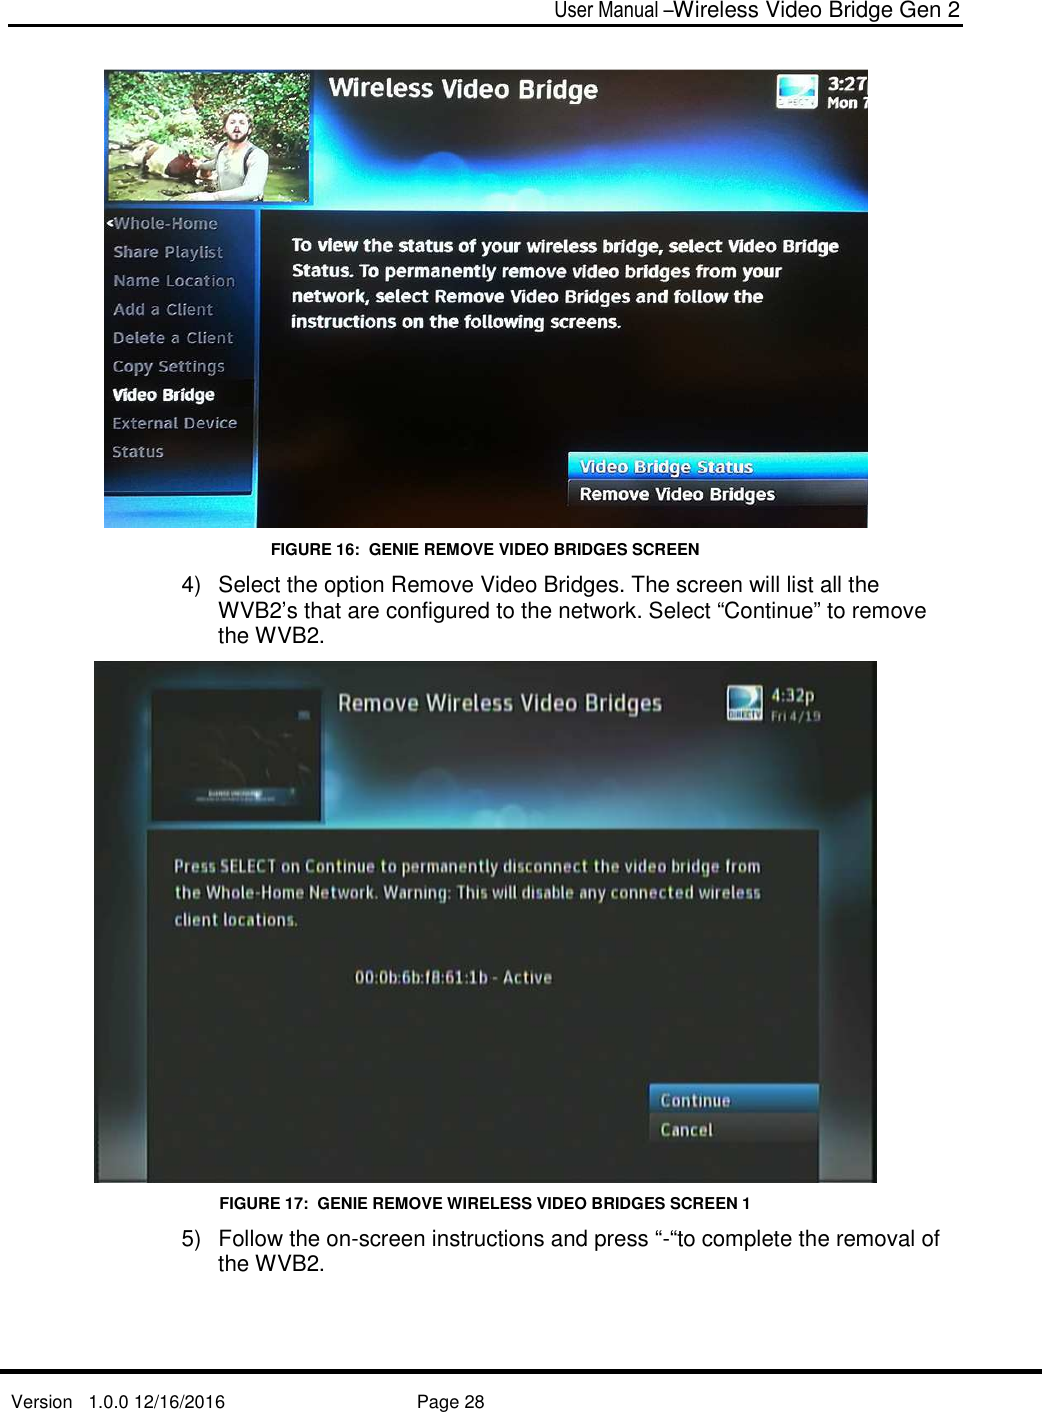  User Manual –Wireless Video Bridge Gen 2  Version   1.0.0 12/16/2016     Page 28    FIGURE 16:  GENIE REMOVE VIDEO BRIDGES SCREEN  4)  Select the option Remove Video Bridges. The screen will list all the WVB2’s that are configured to the network. Select “Continue” to remove the WVB2.  FIGURE 17:  GENIE REMOVE WIRELESS VIDEO BRIDGES SCREEN 1 5)  Follow the on-screen instructions and press “-“to complete the removal of the WVB2. 